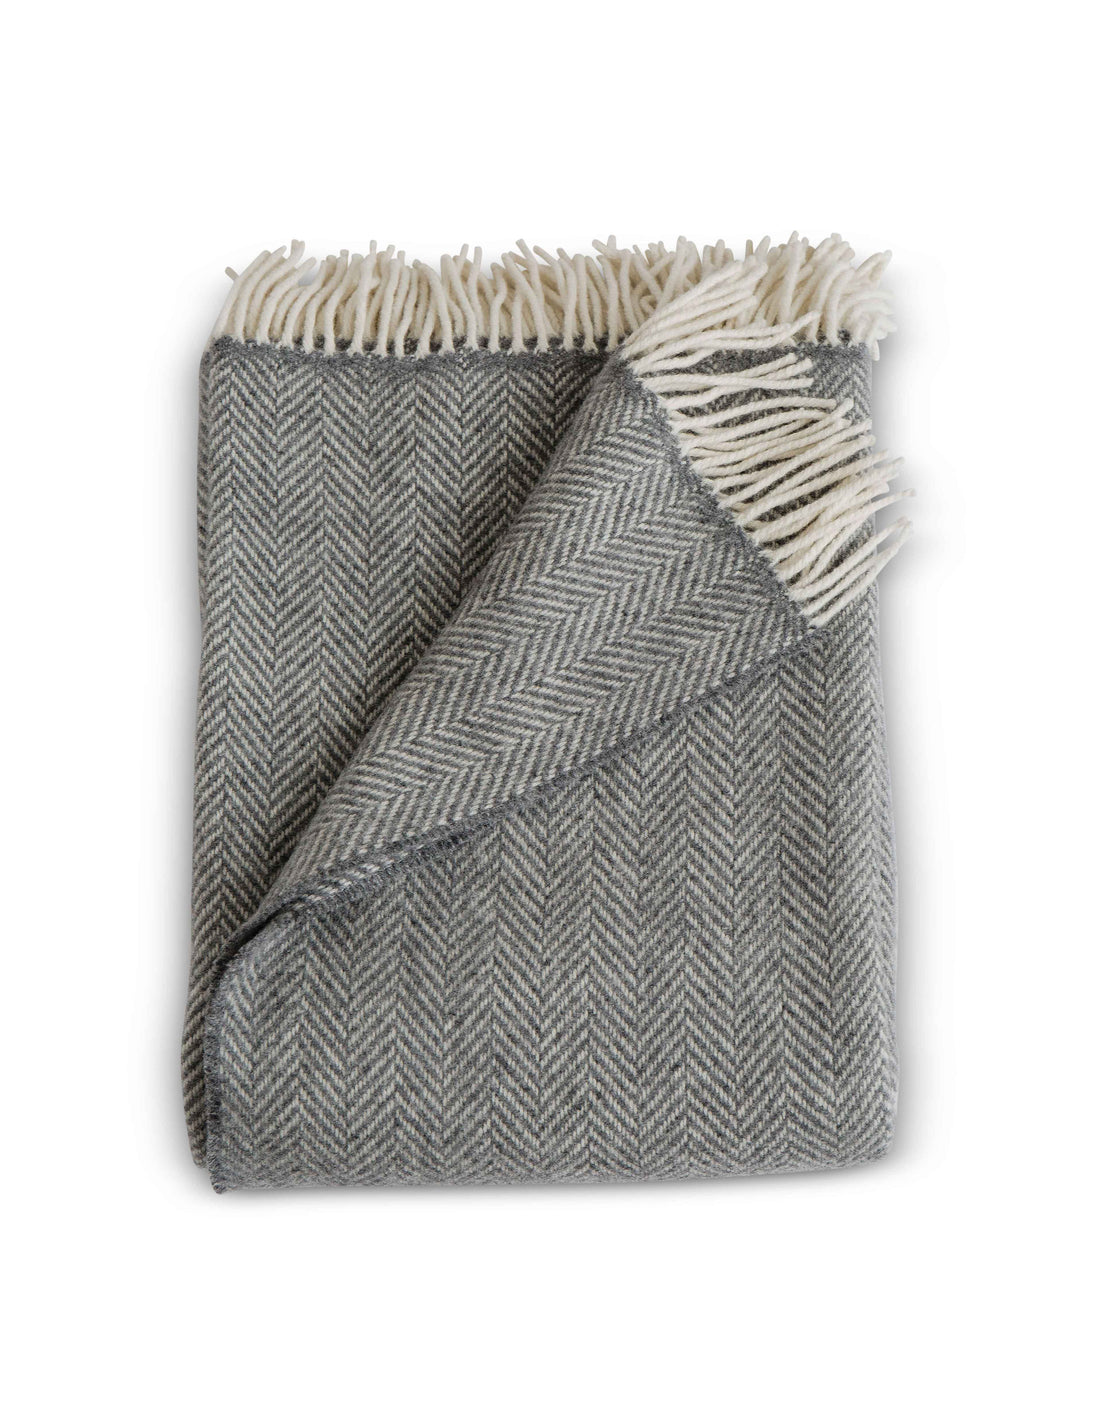 Folded Herringbone throw in Graphite, a medium dark grey colored throw with cream fringe detail. Timeless herringbone design. Super soft luster of cashmere. cozy comfort of merino wool. A chunky and cuddly classic. 95% Merino Lambswool and 5% Cashmere. Woven in Ireland.